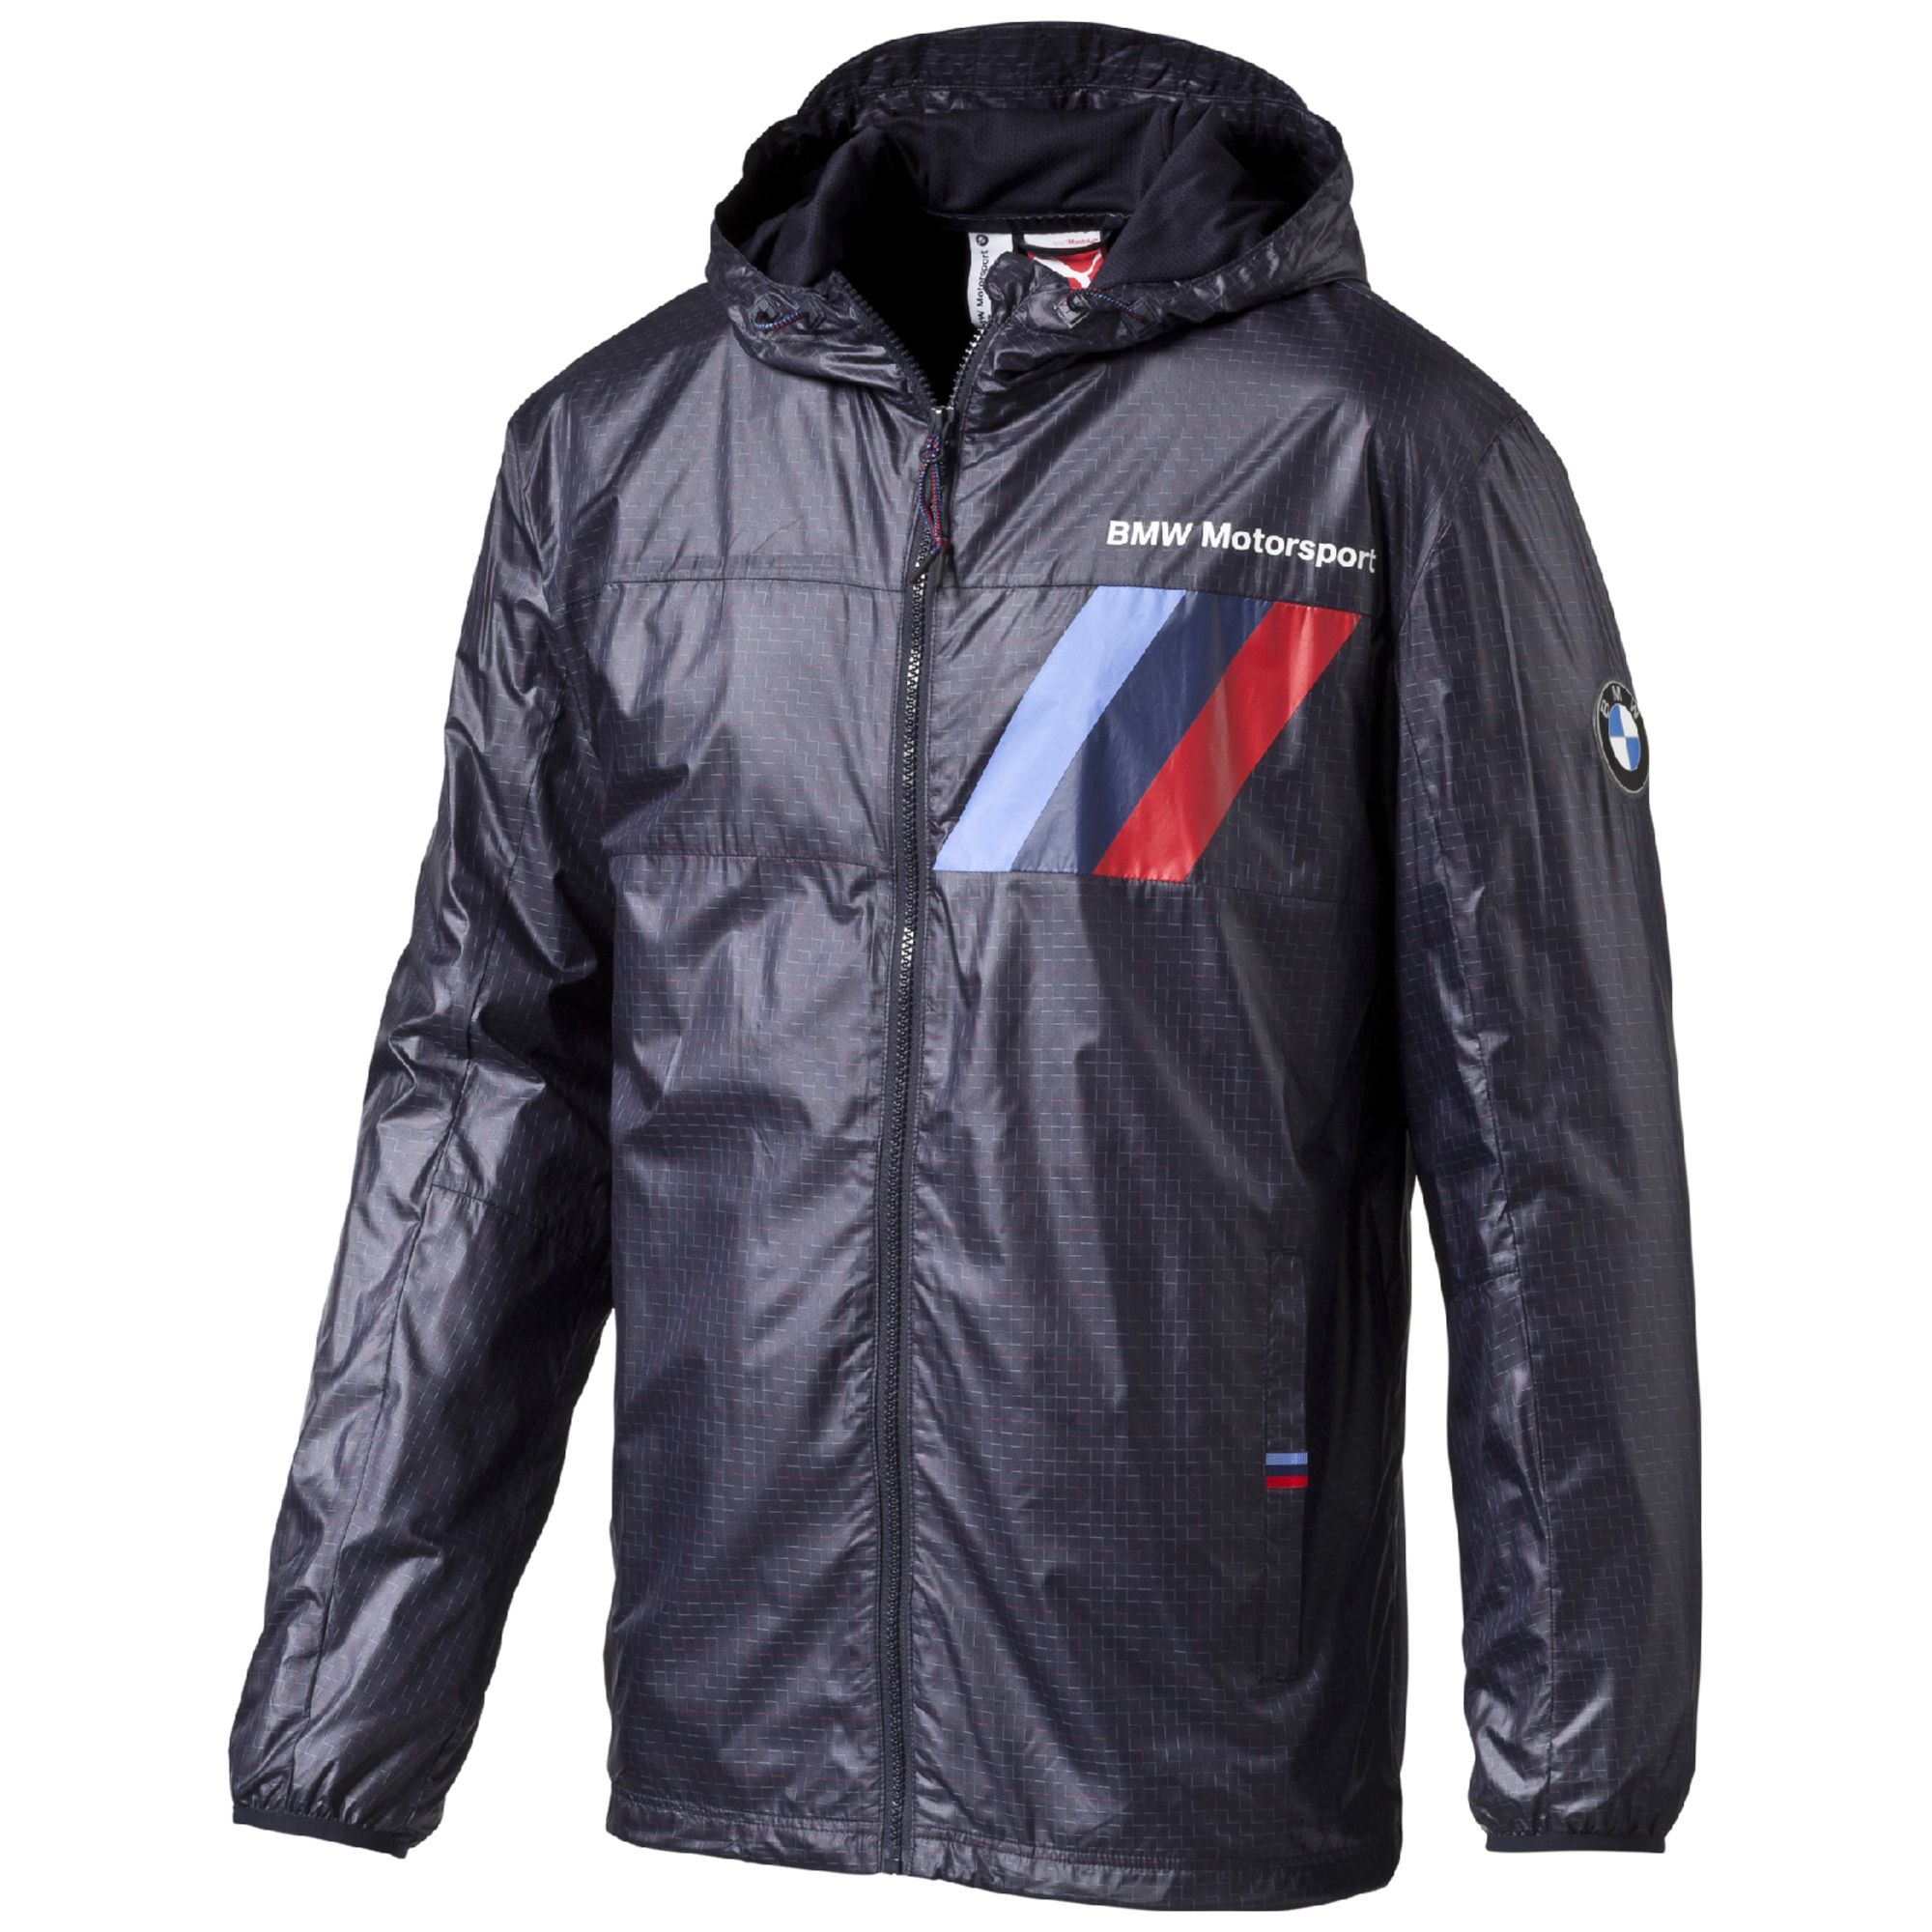 Bmw motorsport clothing south africa #4